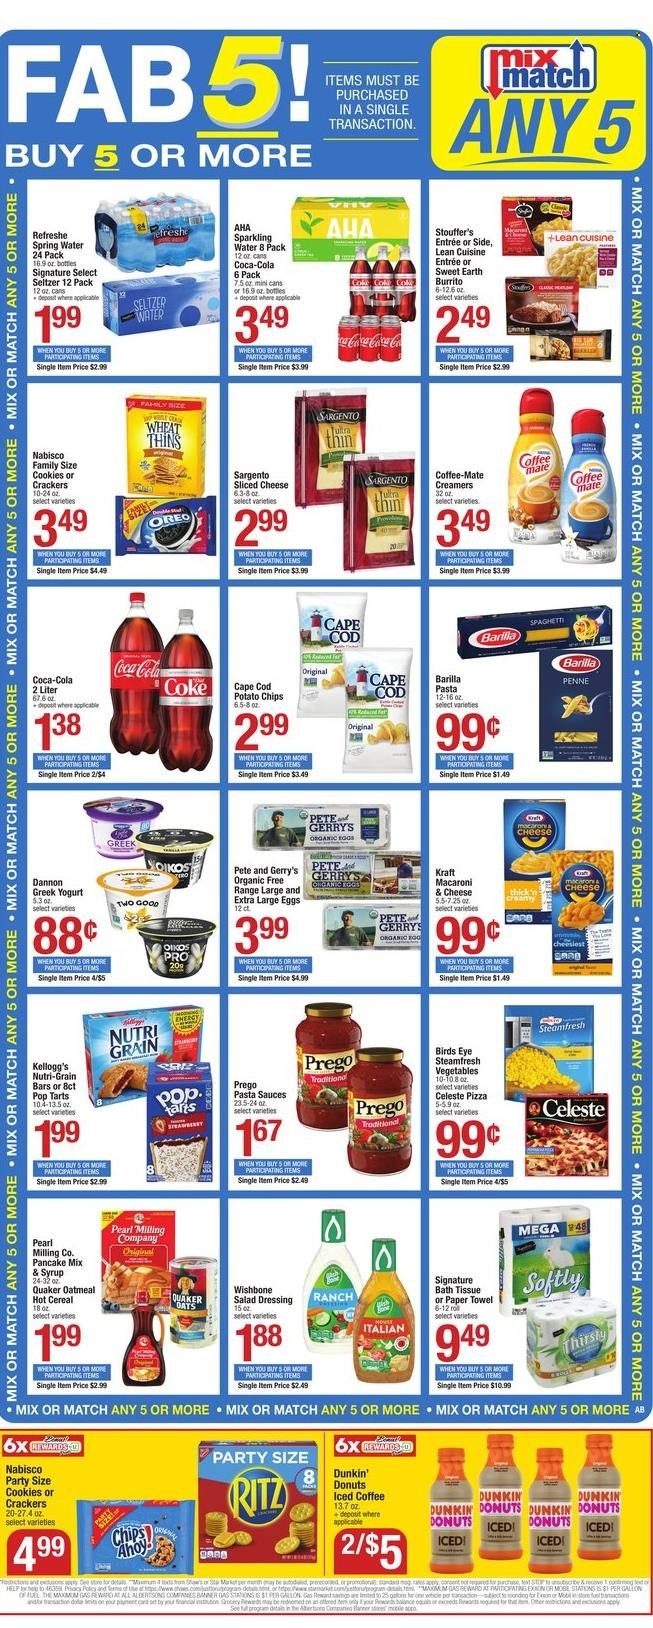 thumbnail - Shaw’s Flyer - 01/21/2022 - 01/27/2022 - Sales products - donut, Dunkin' Donuts, cod, macaroni & cheese, spaghetti, pizza, pasta, pancakes, Bird's Eye, Barilla, burrito, Quaker, Lean Cuisine, Kraft®, sliced cheese, Sargento, greek yoghurt, Oreo, yoghurt, Dannon, Coffee-Mate, large eggs, Stouffer's, Celeste, cookies, crackers, Kellogg's, Pop-Tarts, Nutri-Grain bars, RITZ, potato chips, chips, Thins, oatmeal, cereals, Nutri-Grain, penne, salad dressing, dressing, Ranch House, syrup, Coca-Cola, seltzer water, spring water, sparkling water, iced coffee, red wine, wine, bath tissue, paper towels, Mum. Page 2.